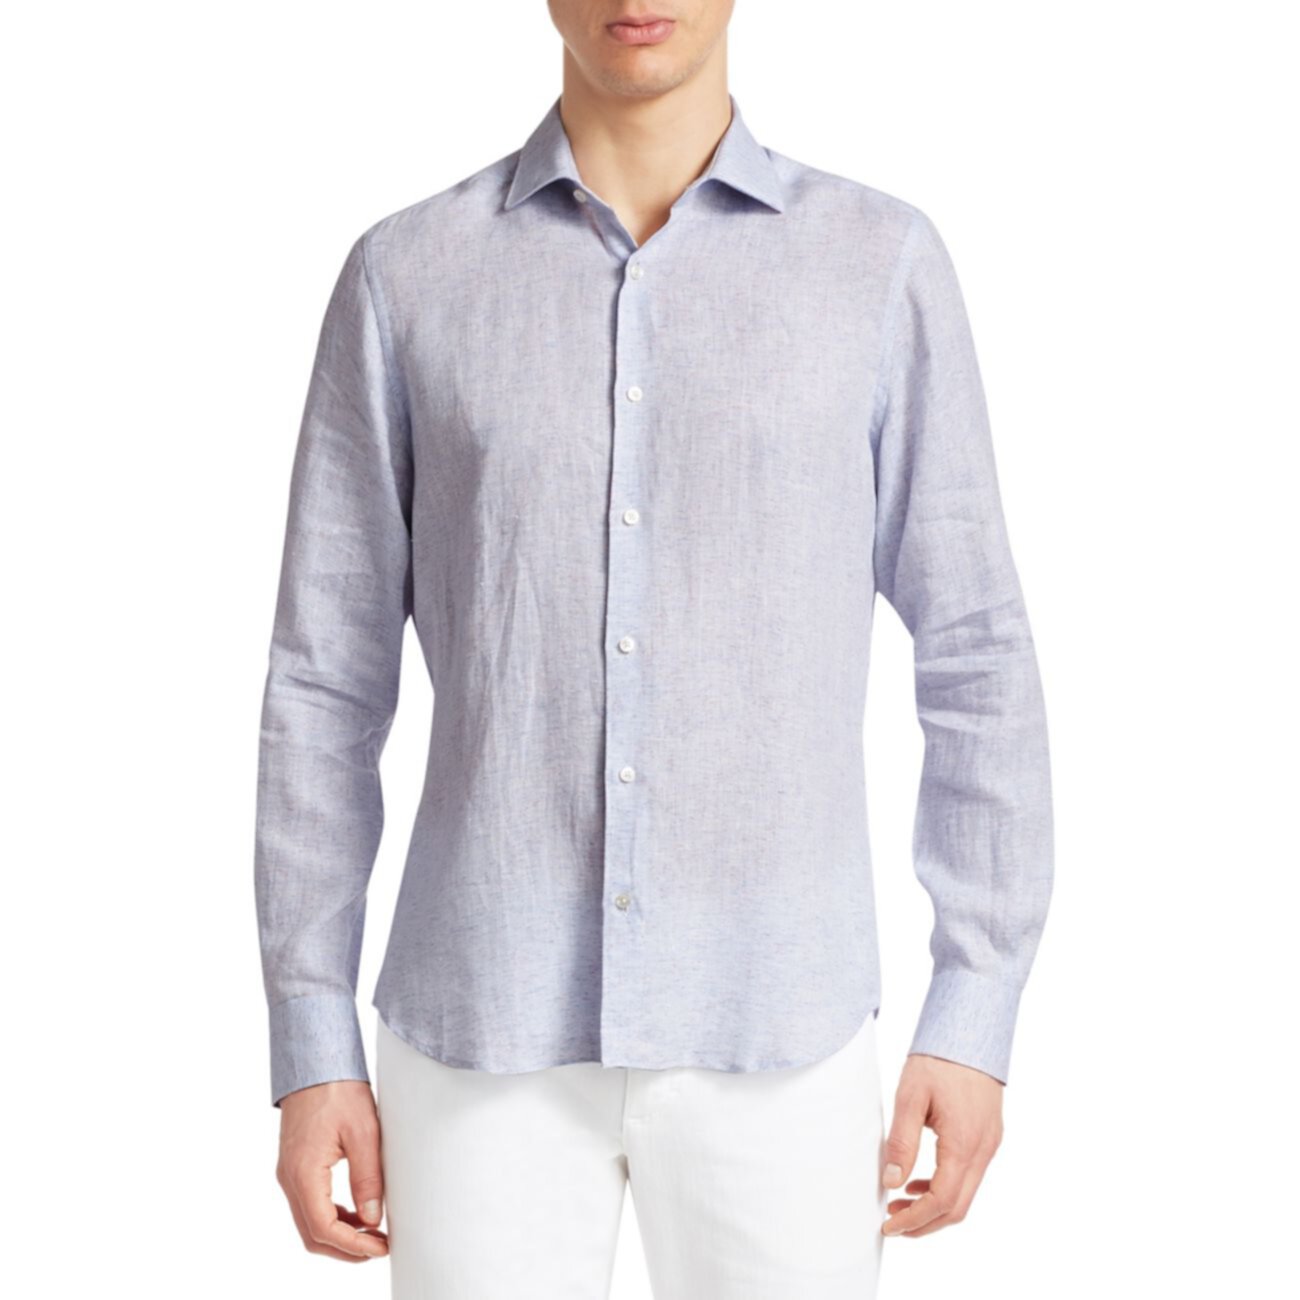 COLLECTION Specked Linen Shirt Saks Fifth Avenue